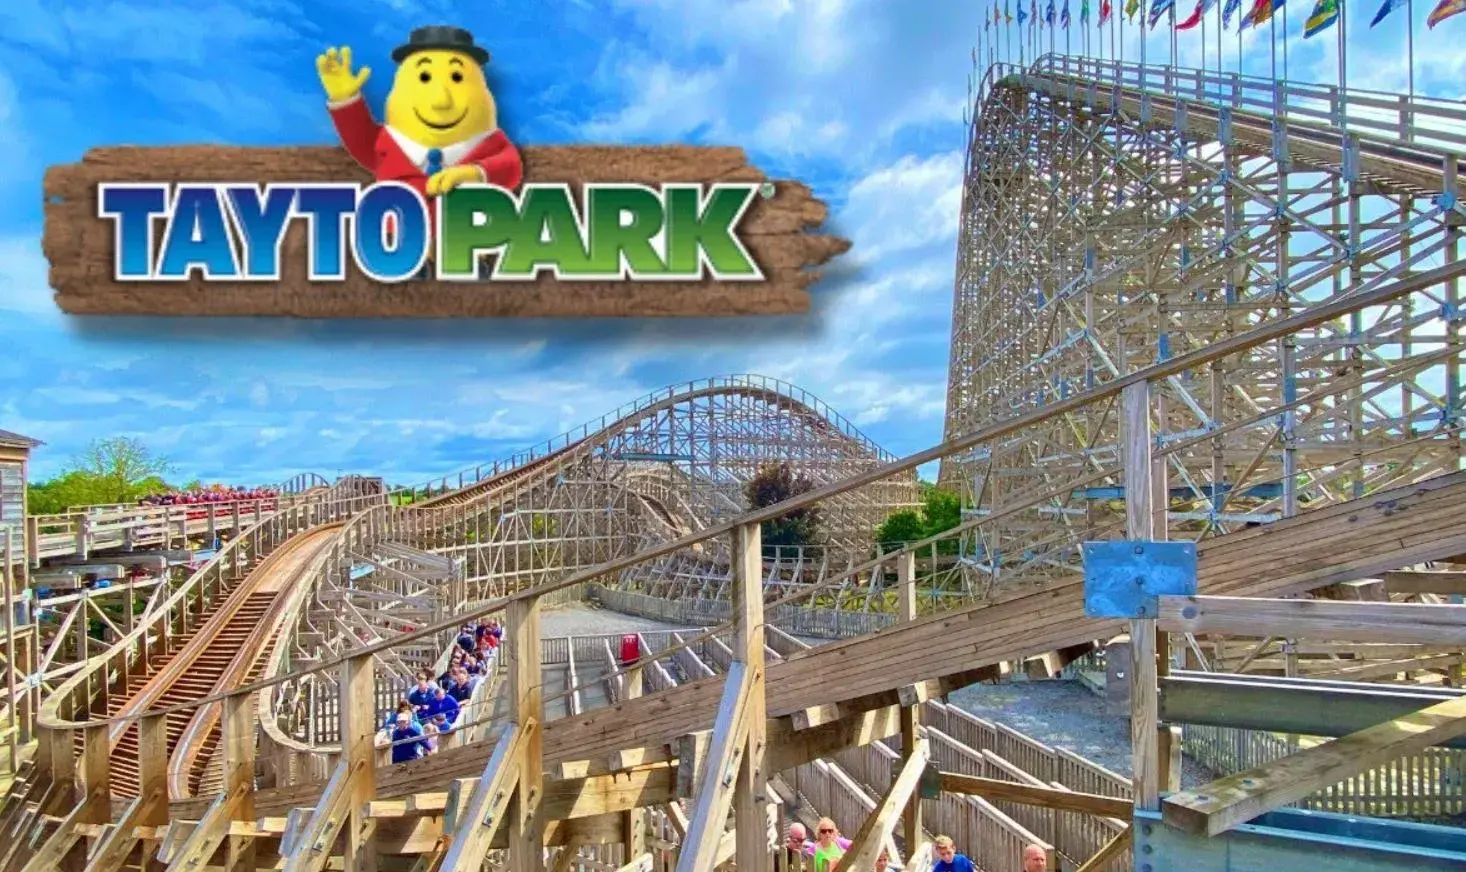 Tayto Park Entrance and Roller coaster